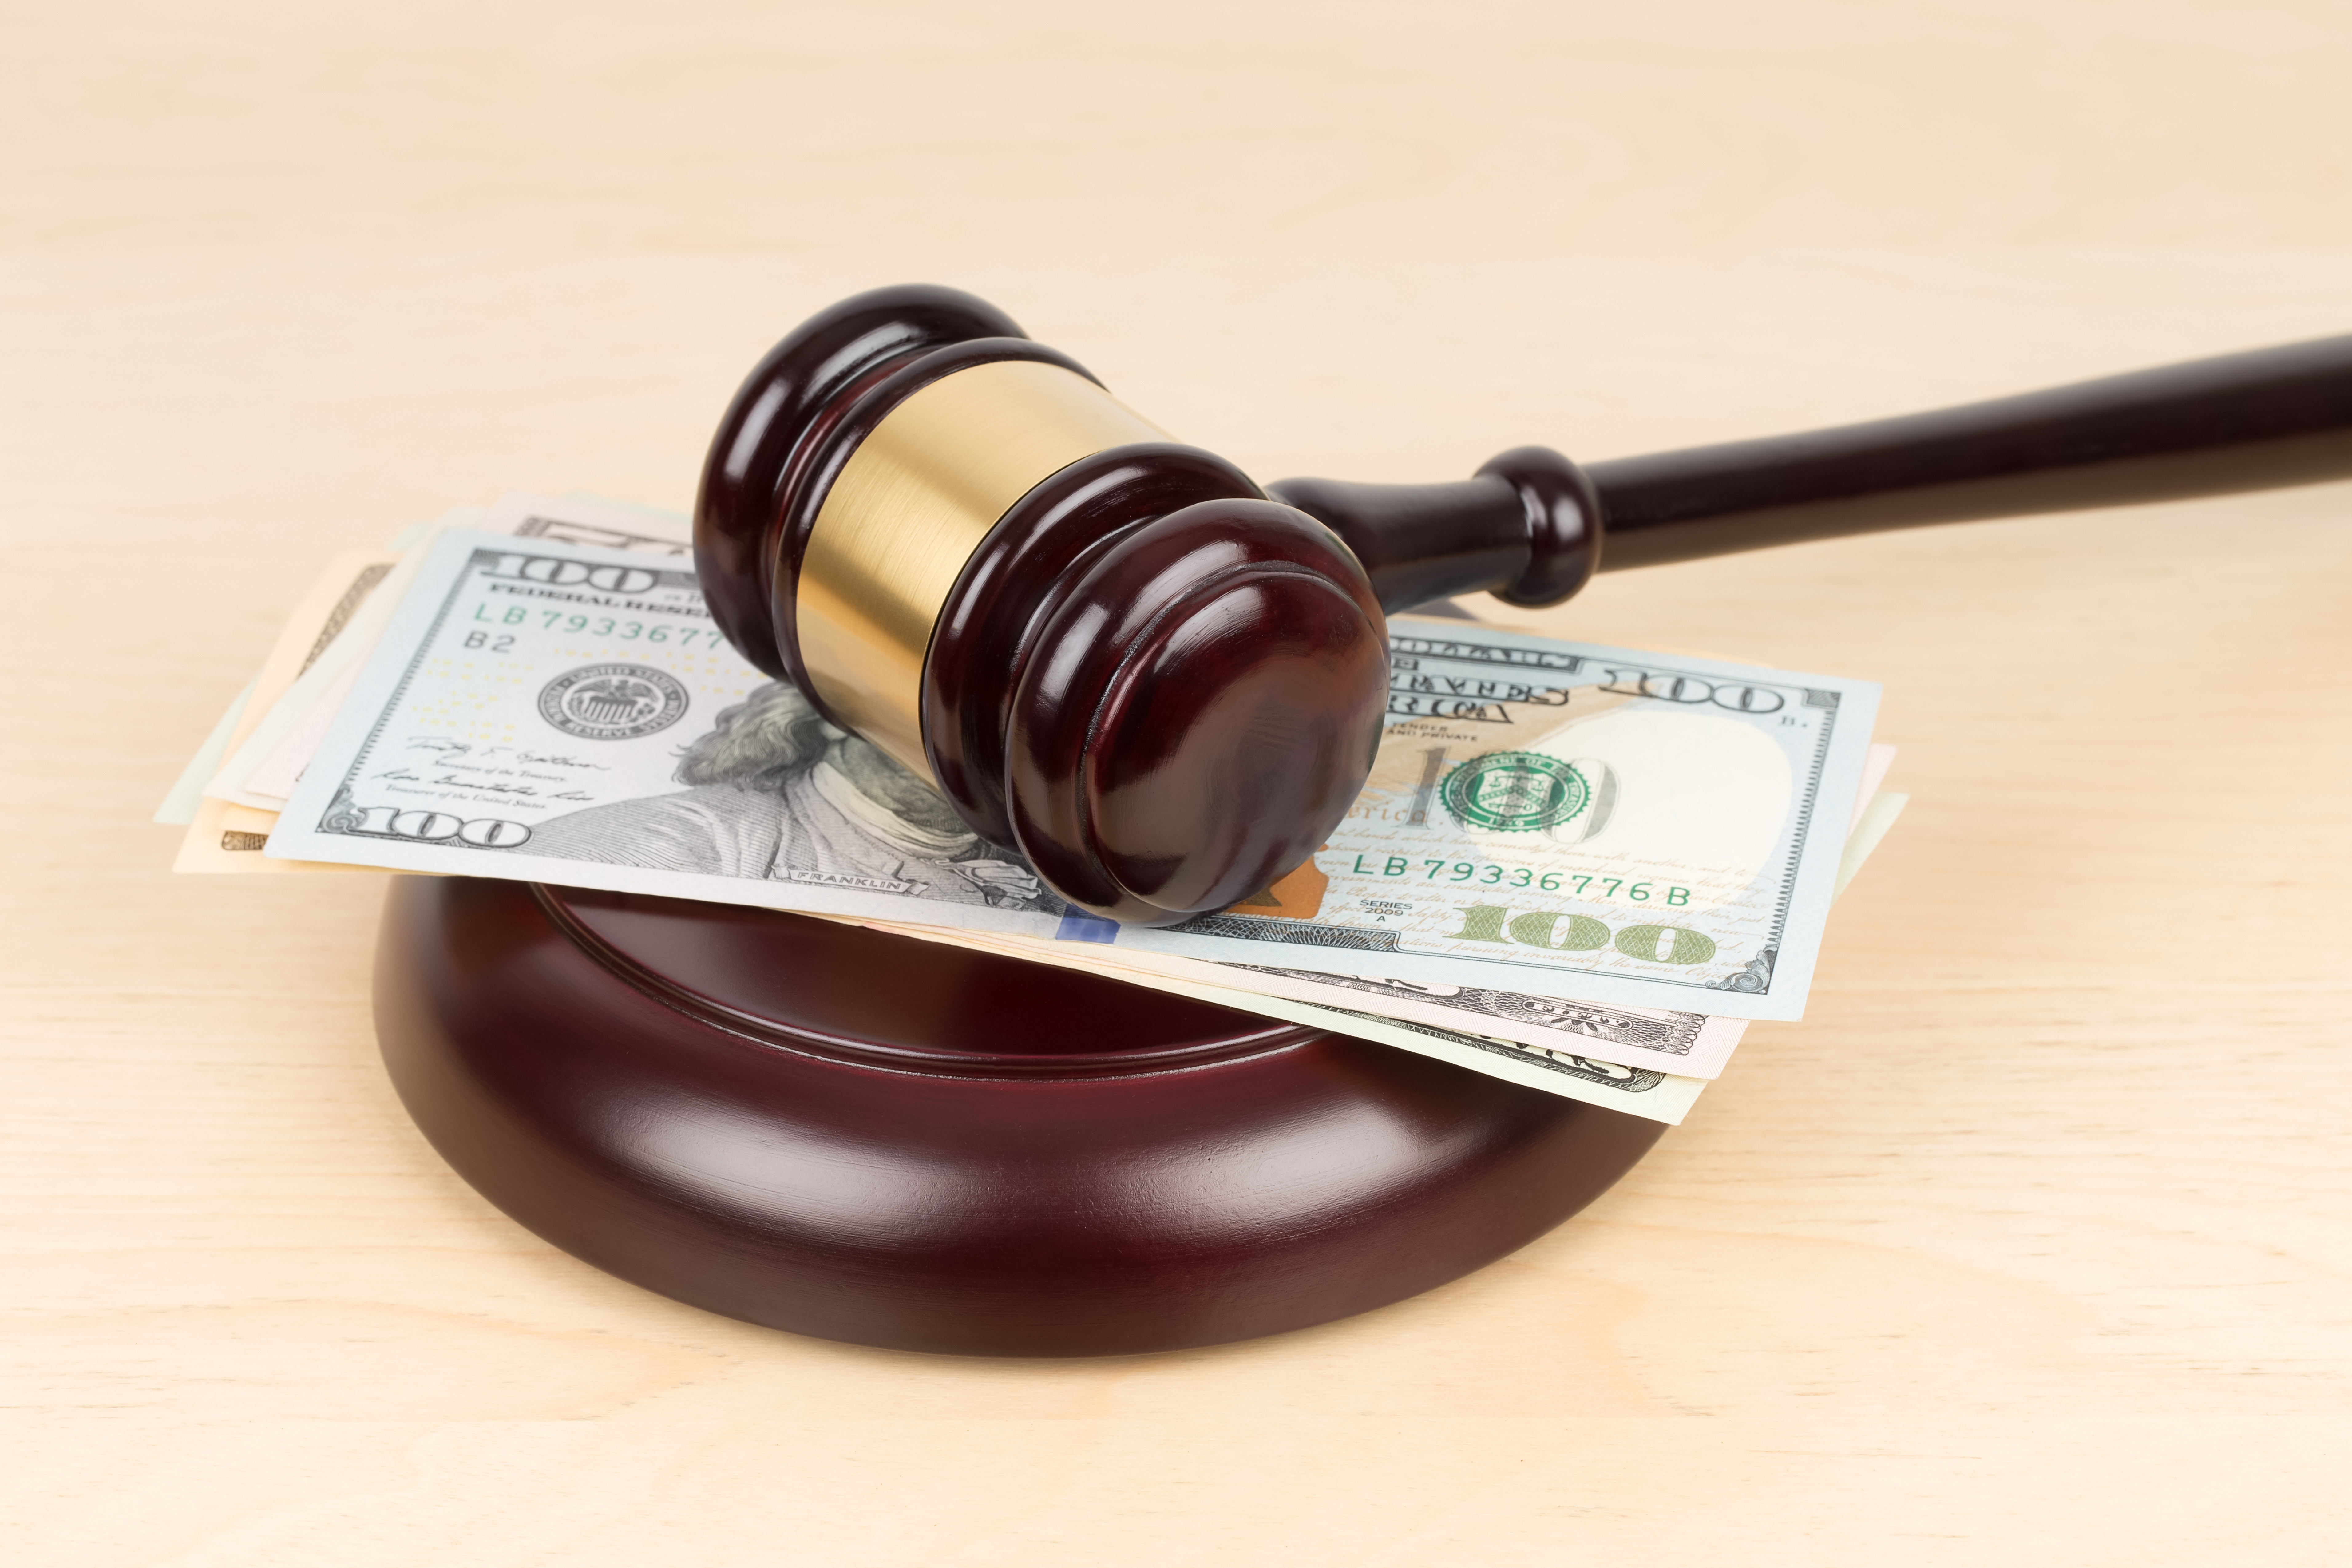 Judge wooden gavel with dollar money banknote